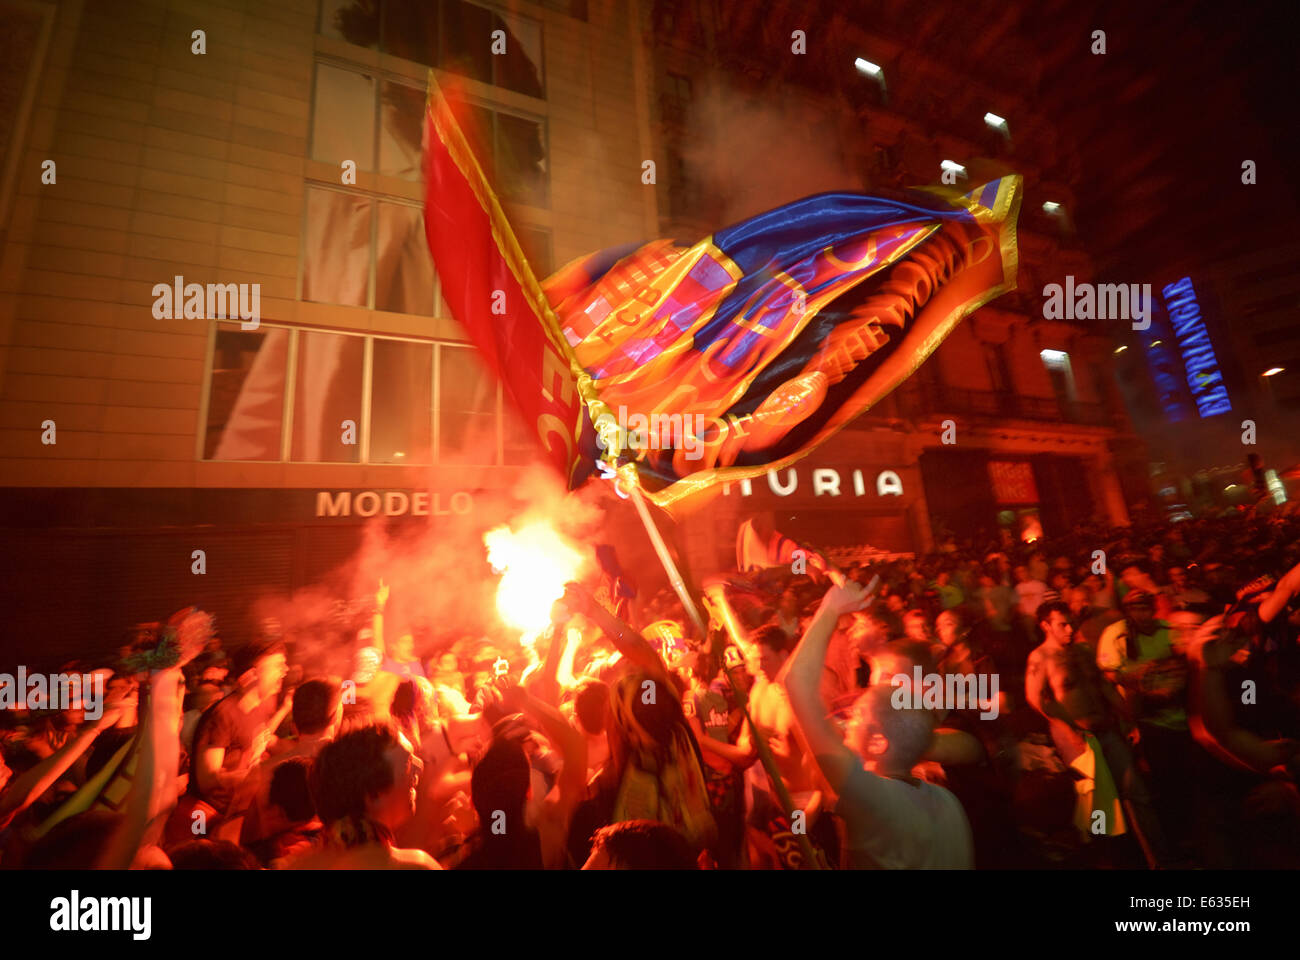 FC Barcelona (FCB) supporters celebrating victory of their soccer team in 2011 at La Rambla, Barcelona, Spain Stock Photo